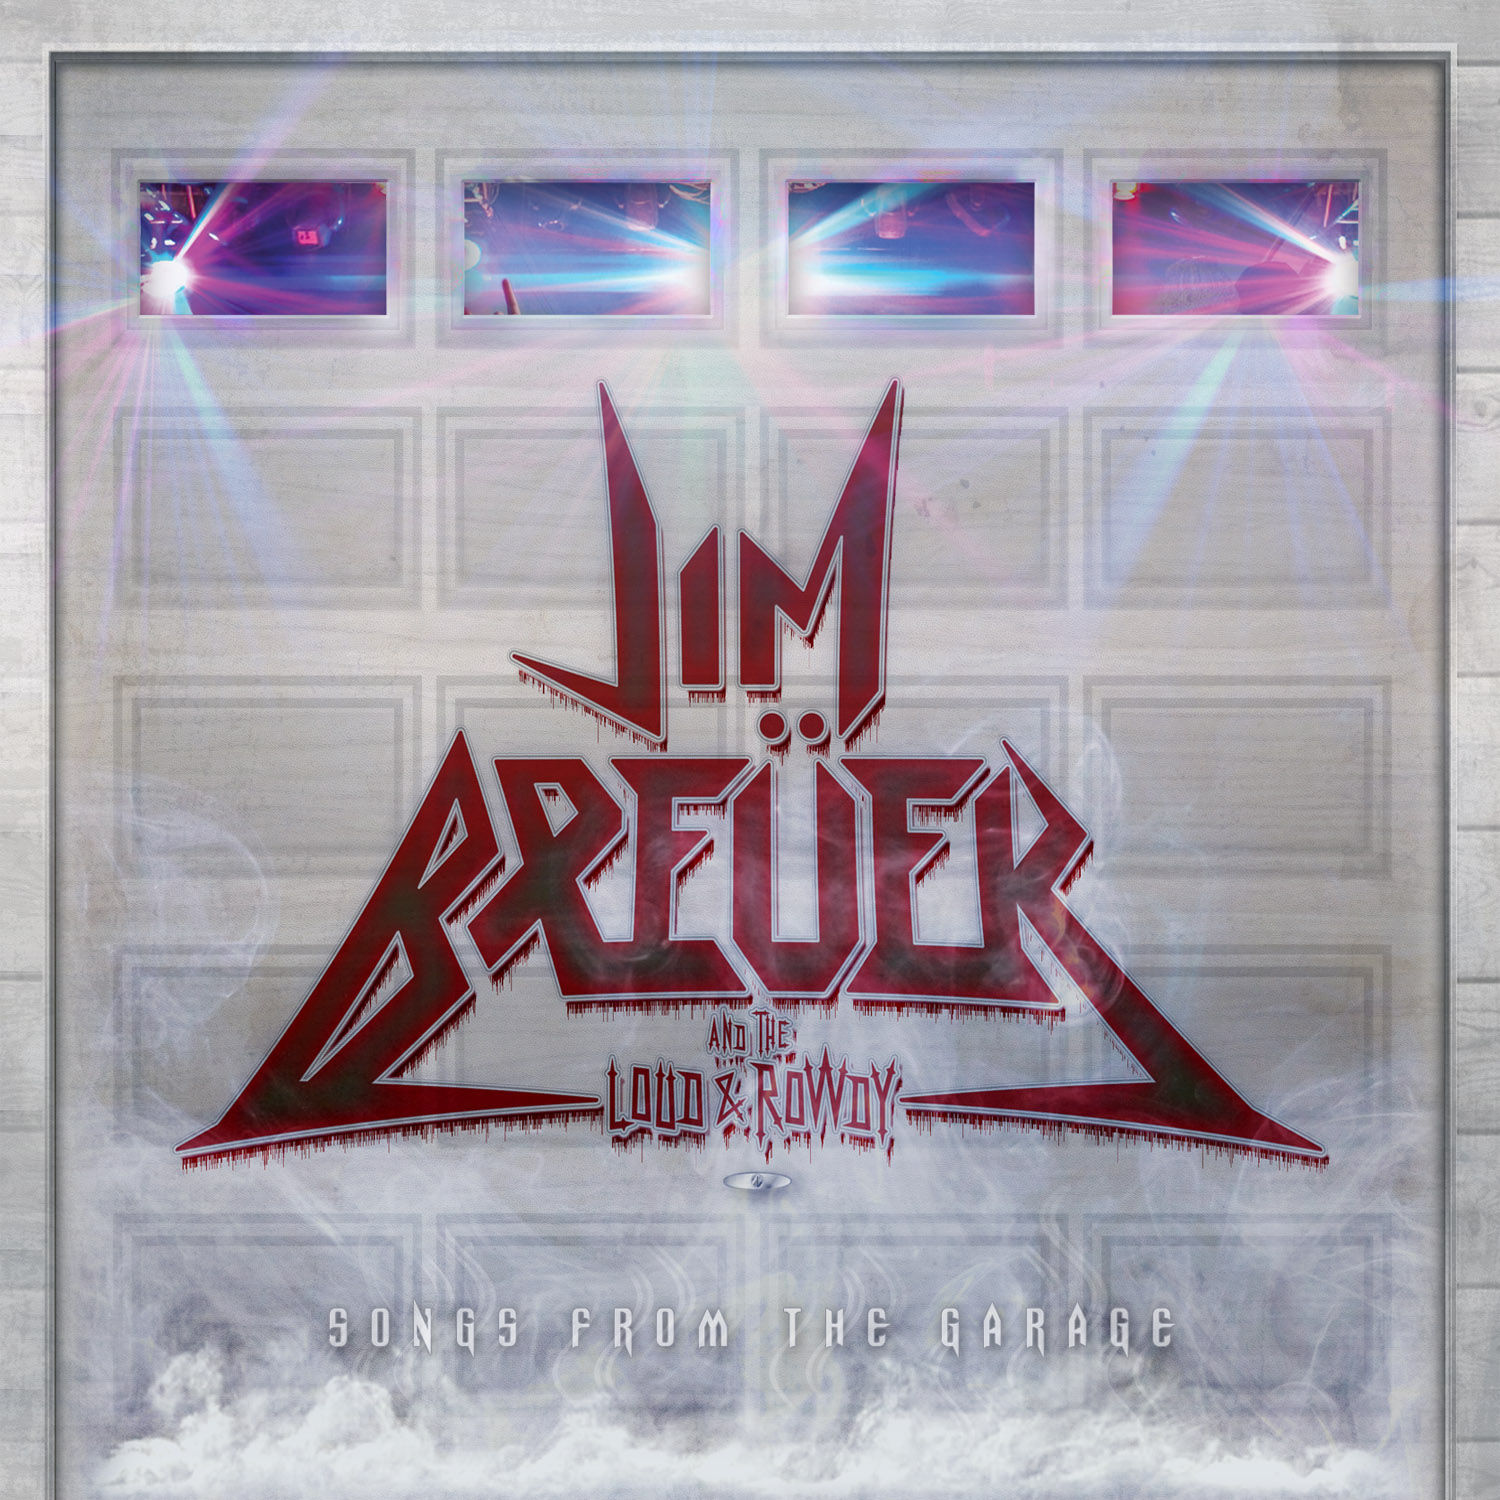 Jim Breuer – Funny Man Gets Hard and Heavy with Songs from the Garage!